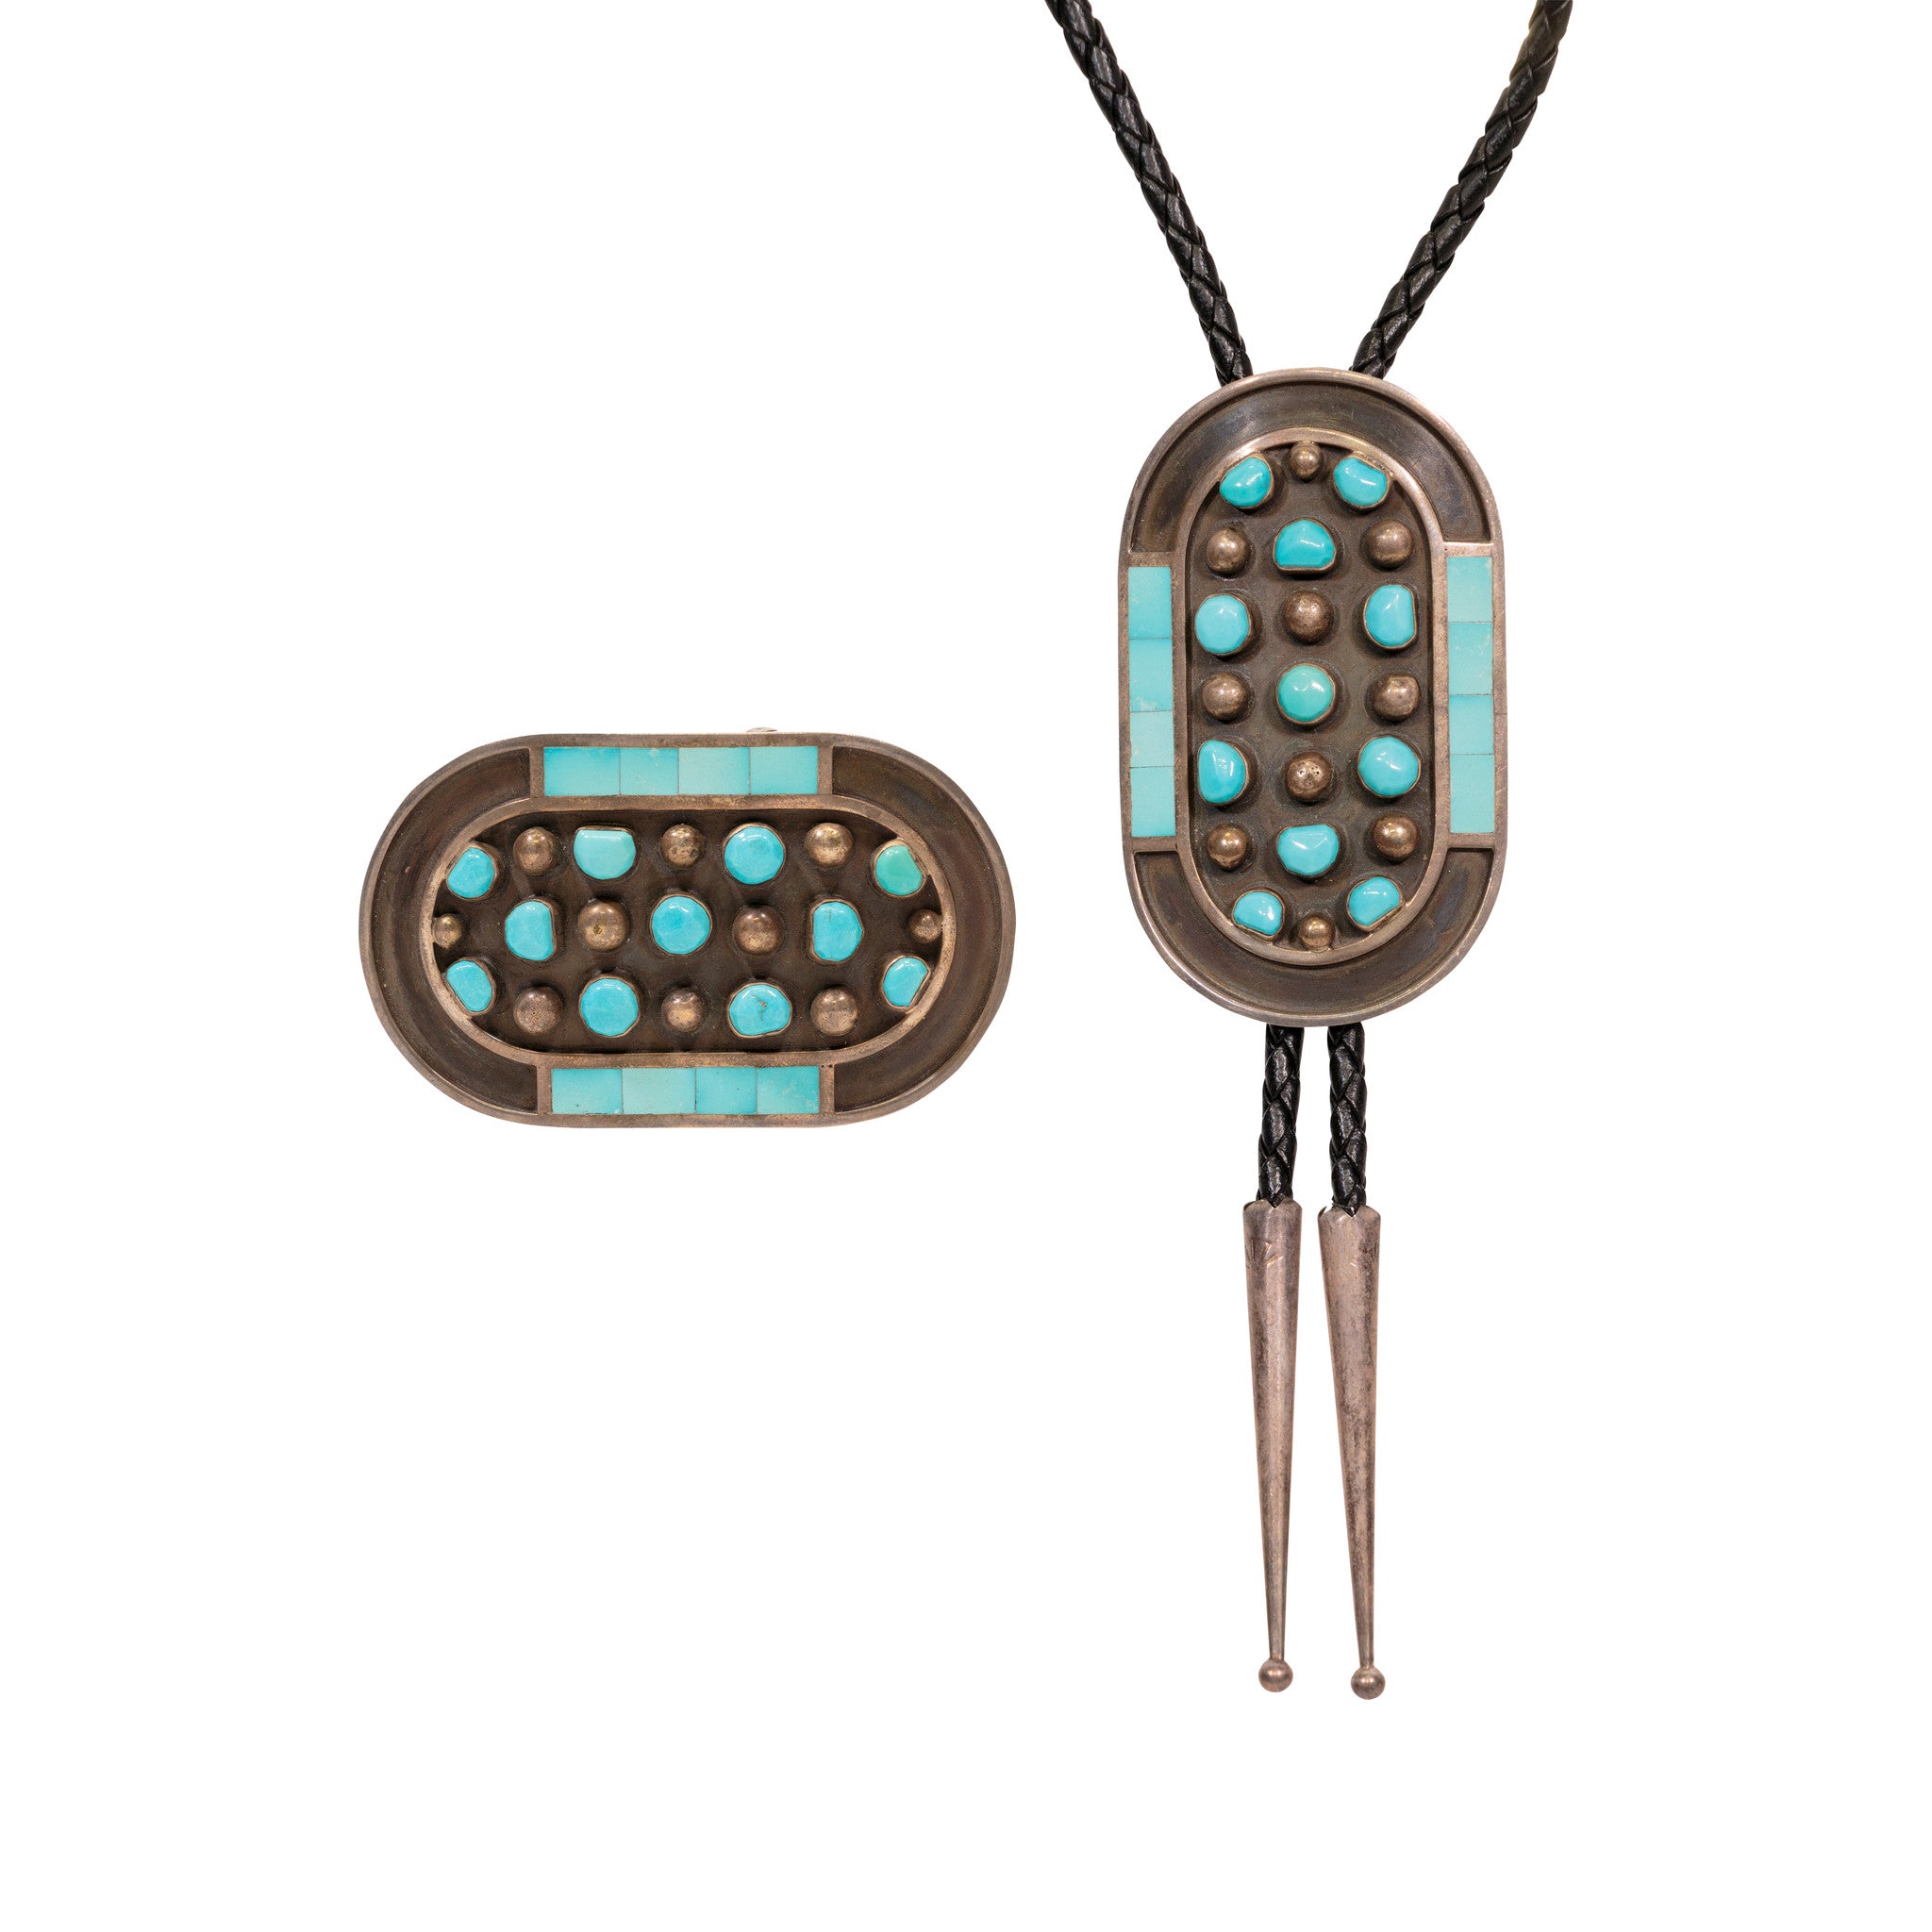 Turquoise Bolo and Buckle Set, Jewelry, Set, Native